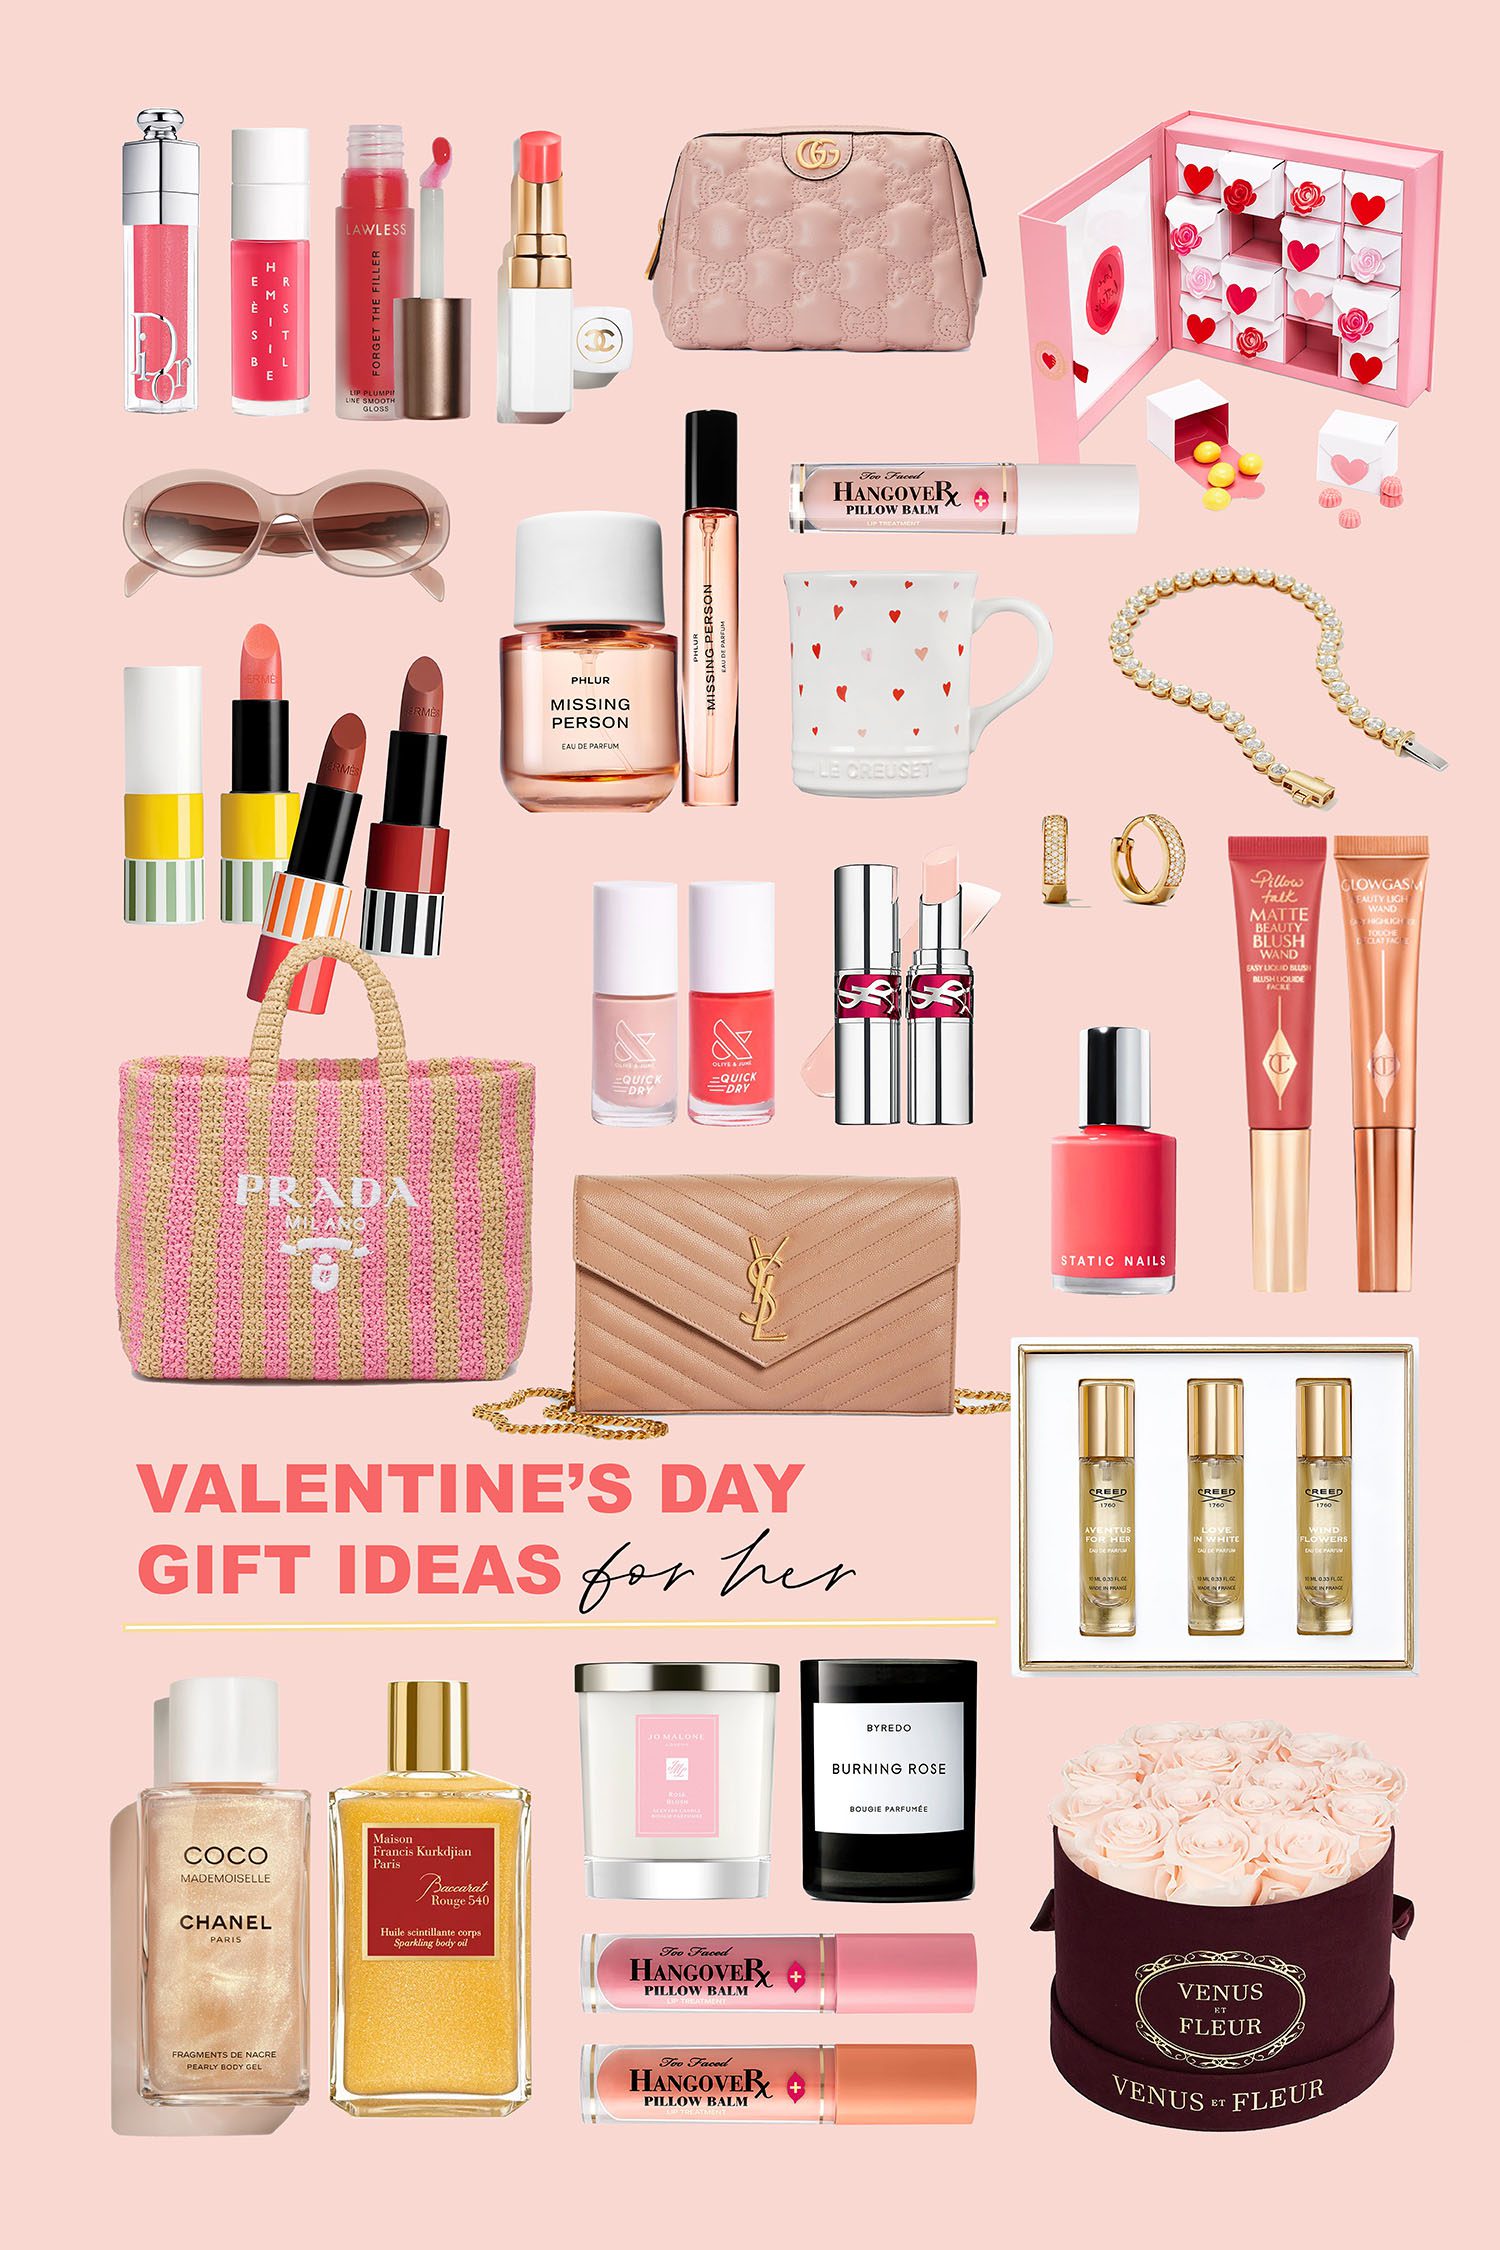 Valentine's Day Archives - The Beauty Look Book